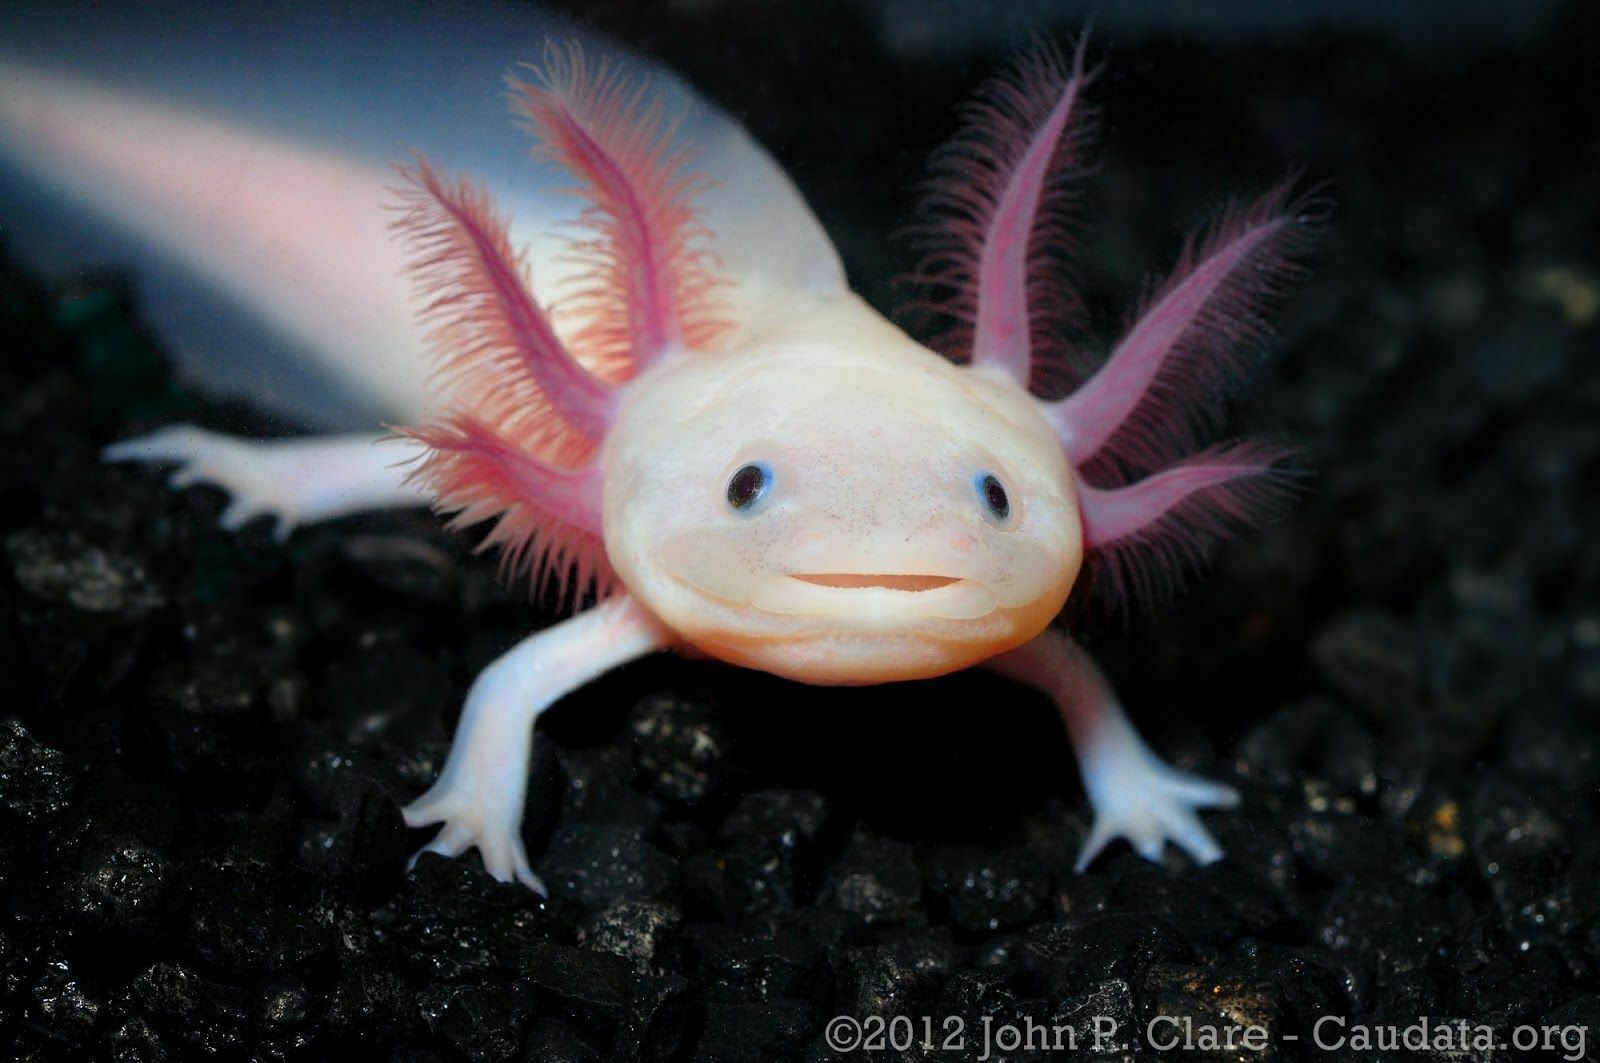 From tarantulas to axolotls: demand for exotic pets has grown during the self-isolation period